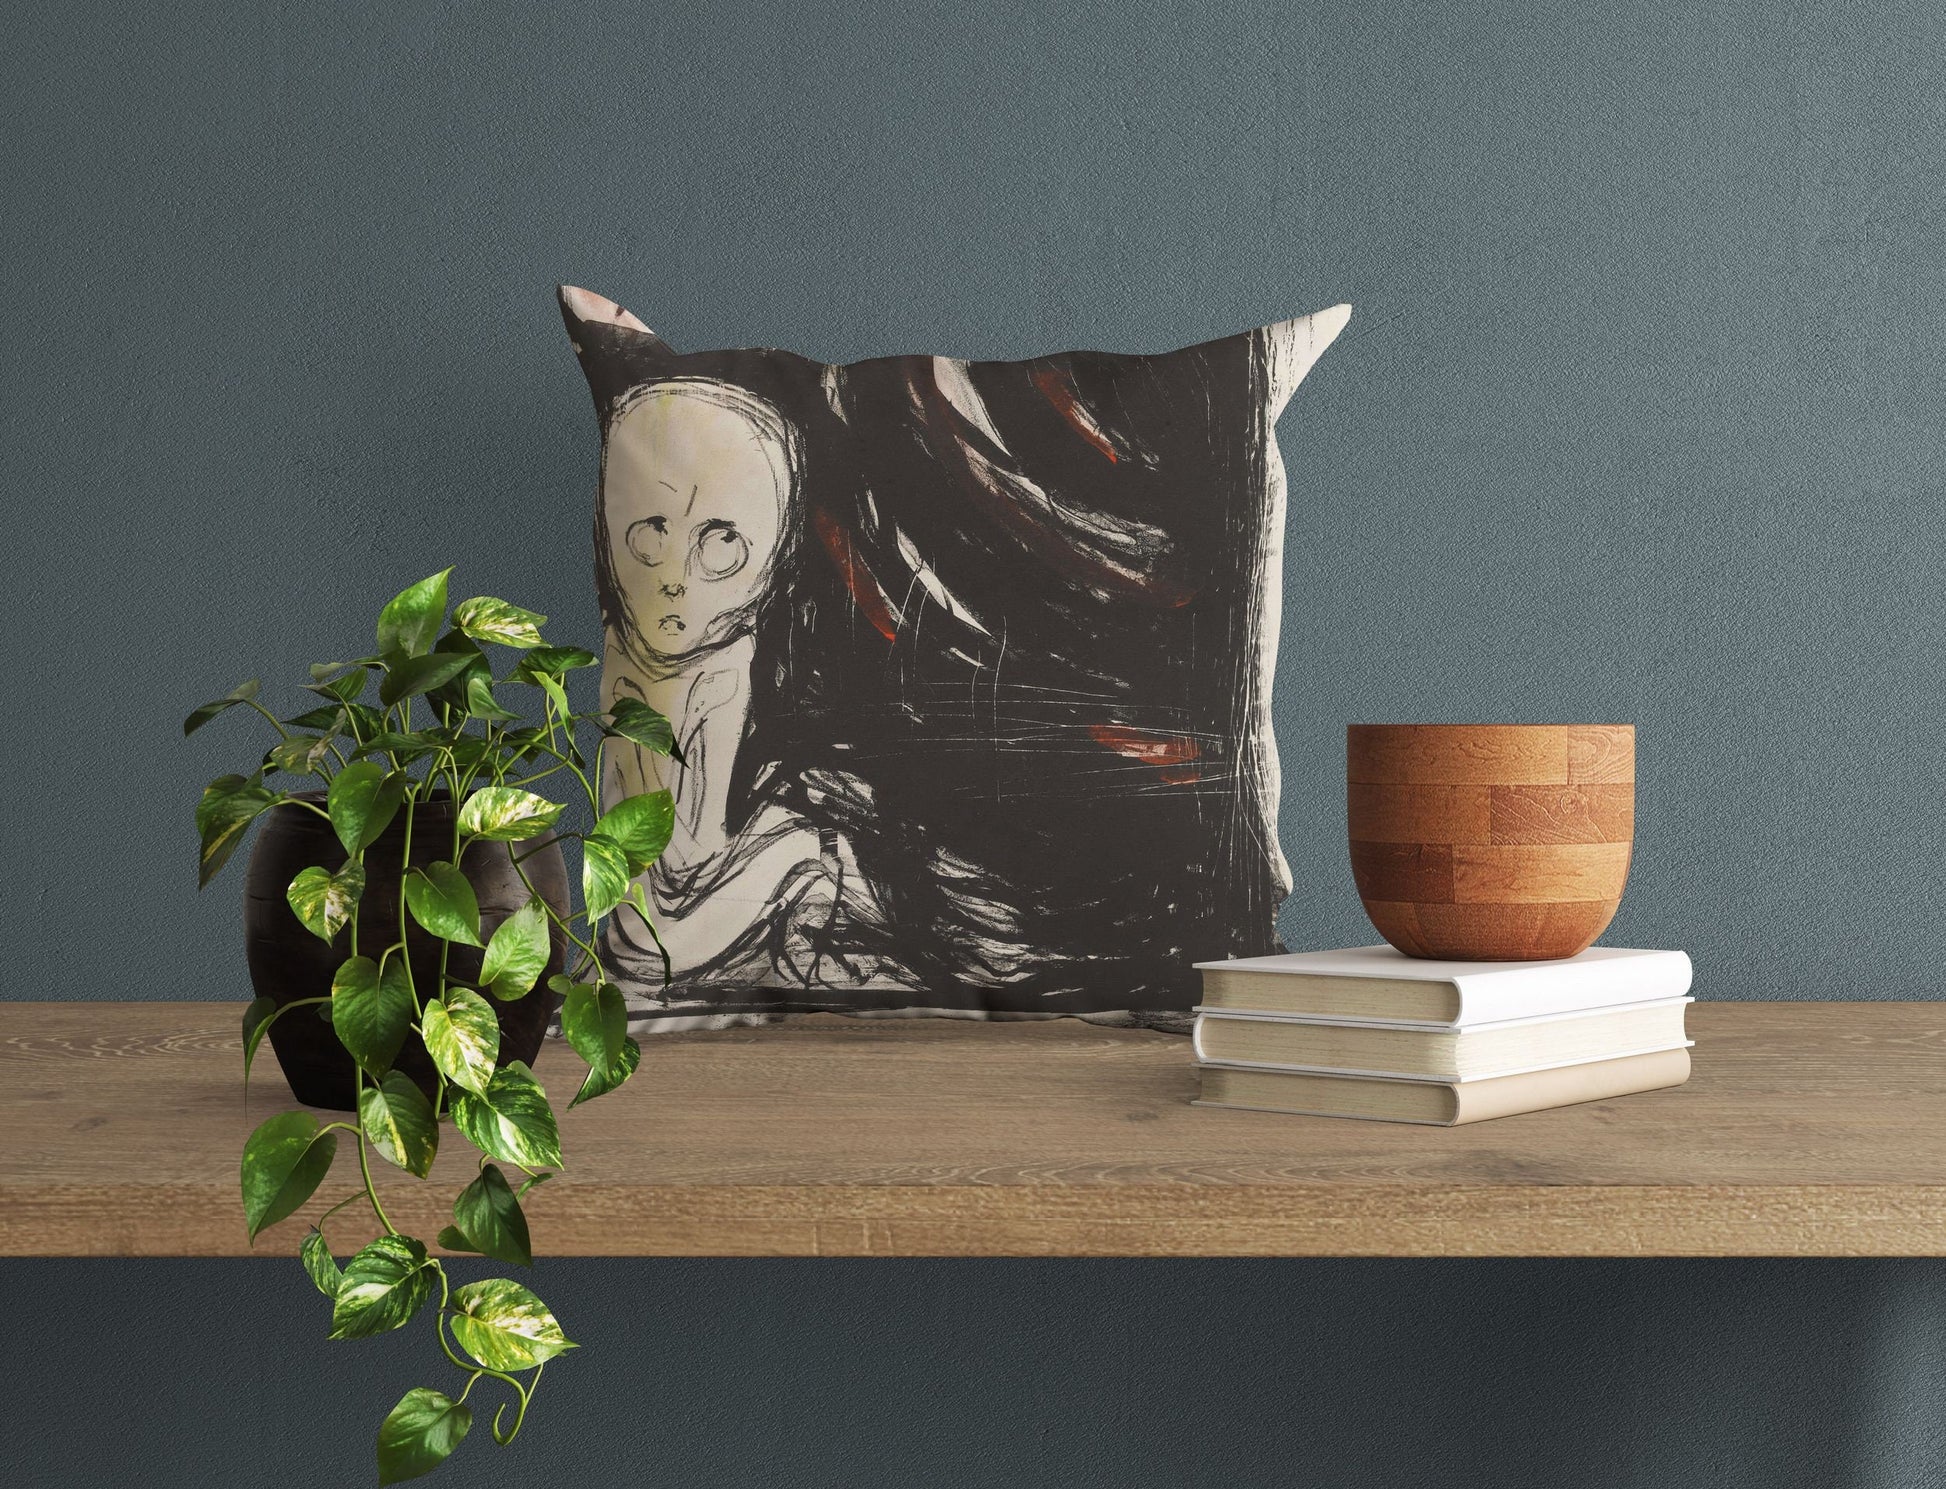 Edvard Munch Famous Art Madonna, Throw Pillow, Abstract Throw Pillow Cover, Soft Pillow Cases, Black And White, Contemporary Pillow